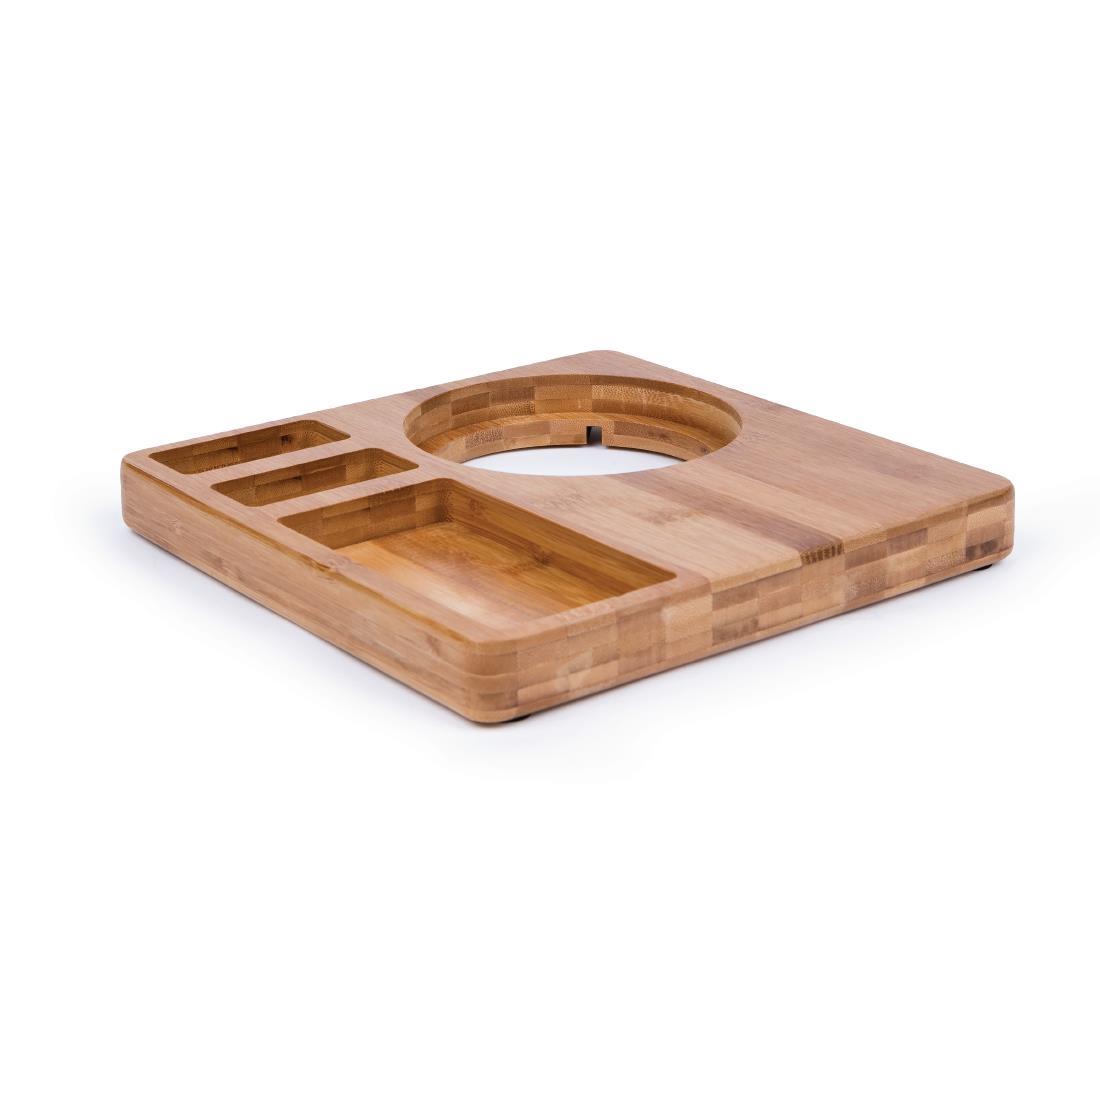 Bamboo Hotel Welcome Tray - CL082  - 2